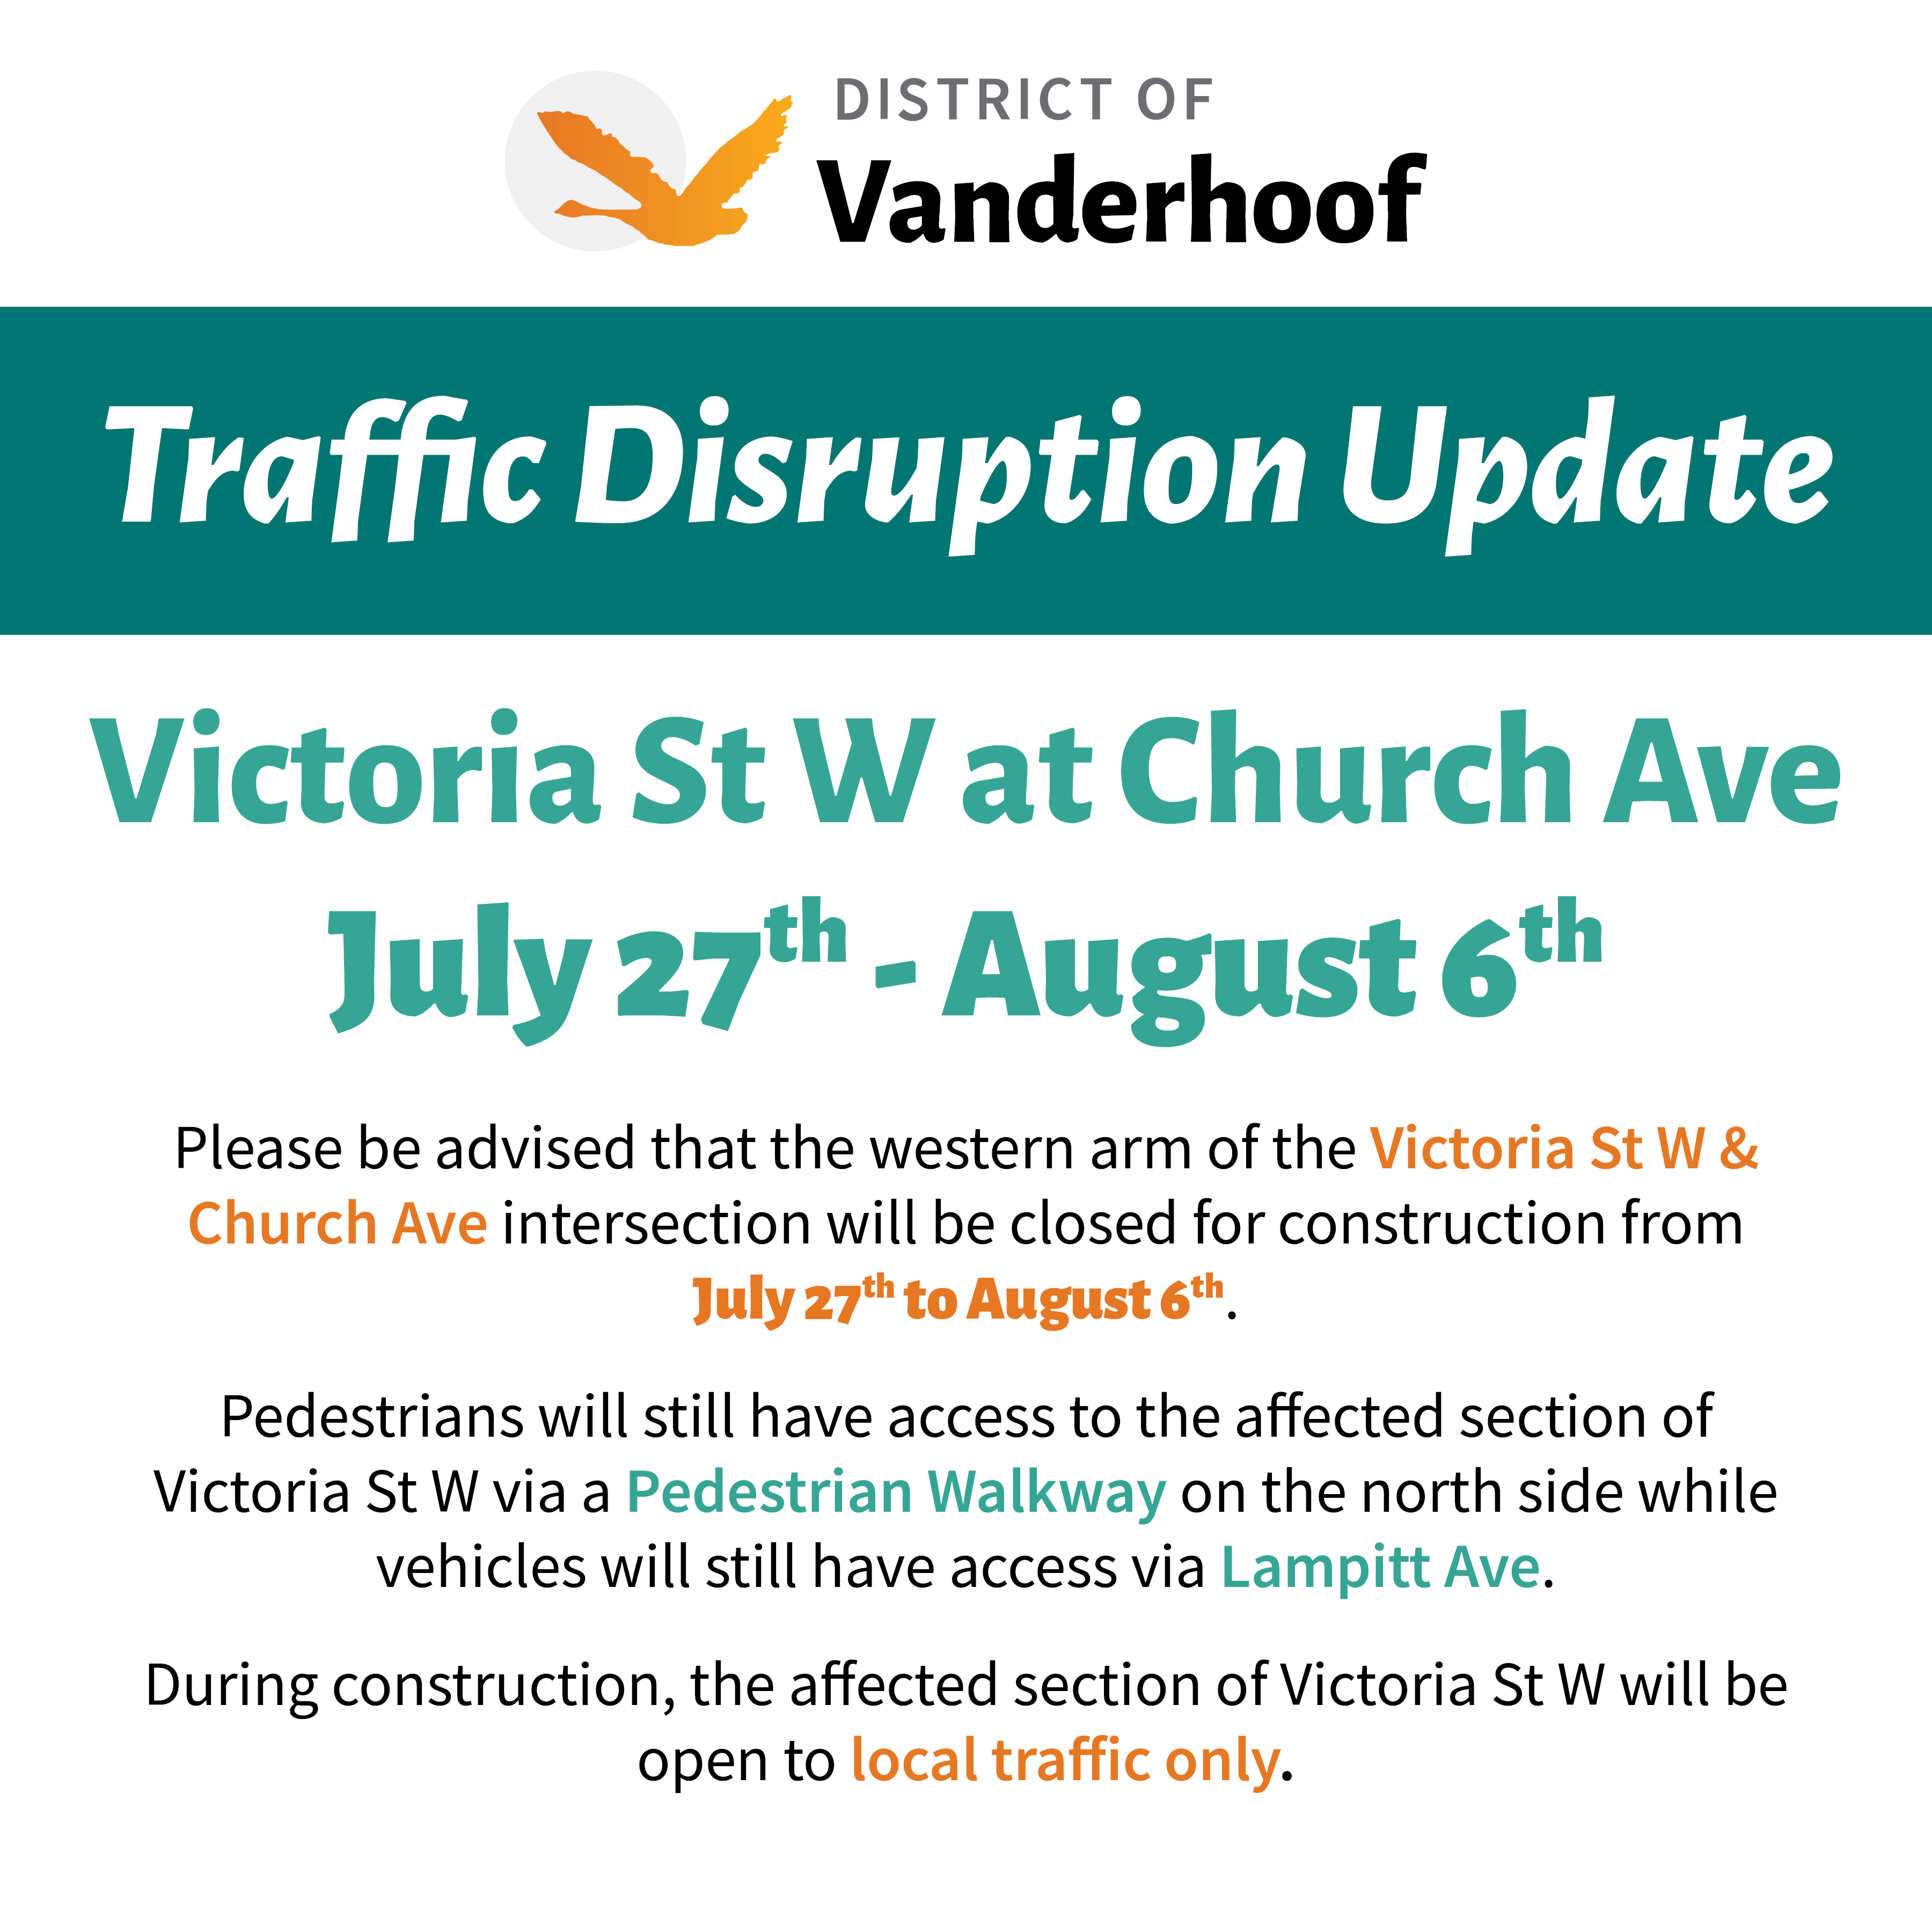 Traffic Disruption Update Victoria St W at Church Ave July 27th - August 6th Please be advised that the western arm of the Victoria St W & Church Ave intersection will be closed for construction from July 27th to August 6th. Pedestrians will still have access to the affected section of Victoria St W via a Pedestrian Walkway on the north side while vehicles will still have access via Lampitt Ave. During construction, the affected section of Victoria St W will be open to local traffic only.